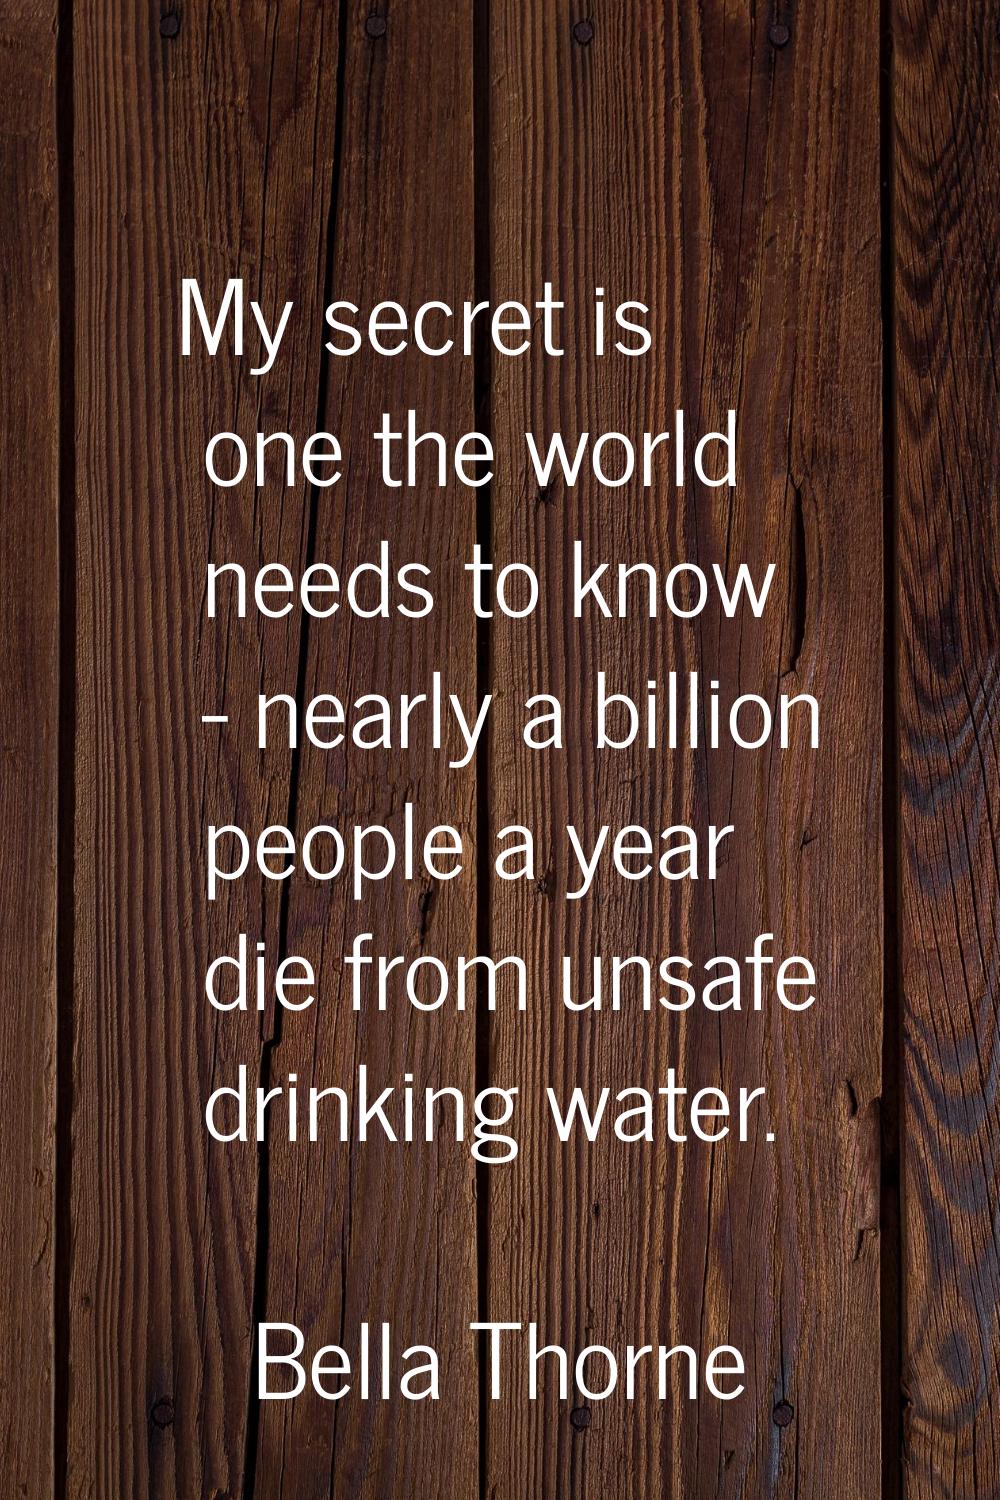 My secret is one the world needs to know - nearly a billion people a year die from unsafe drinking 